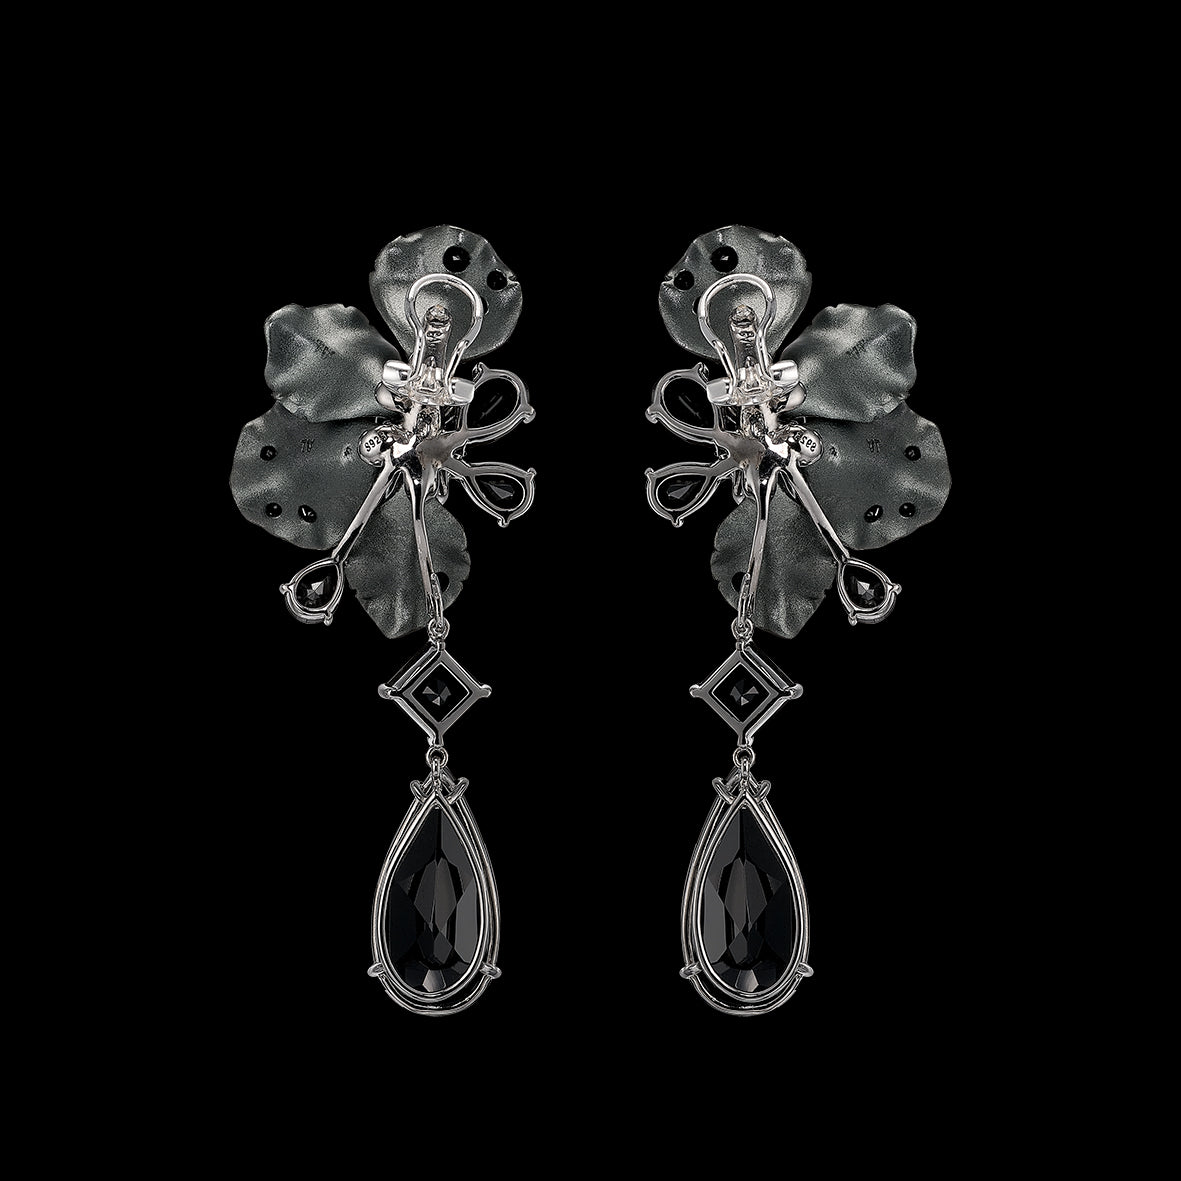 Black Diamond Ariel Earrings, Earrings, Anabela Chan Joaillerie - Fine jewelry with laboratory grown and created gemstones hand-crafted in the United Kingdom. Anabela Chan Joaillerie is the first fine jewellery brand in the world to champion laboratory-grown and created gemstones with high jewellery design, artisanal craftsmanship and a focus on ethical and sustainable innovations.